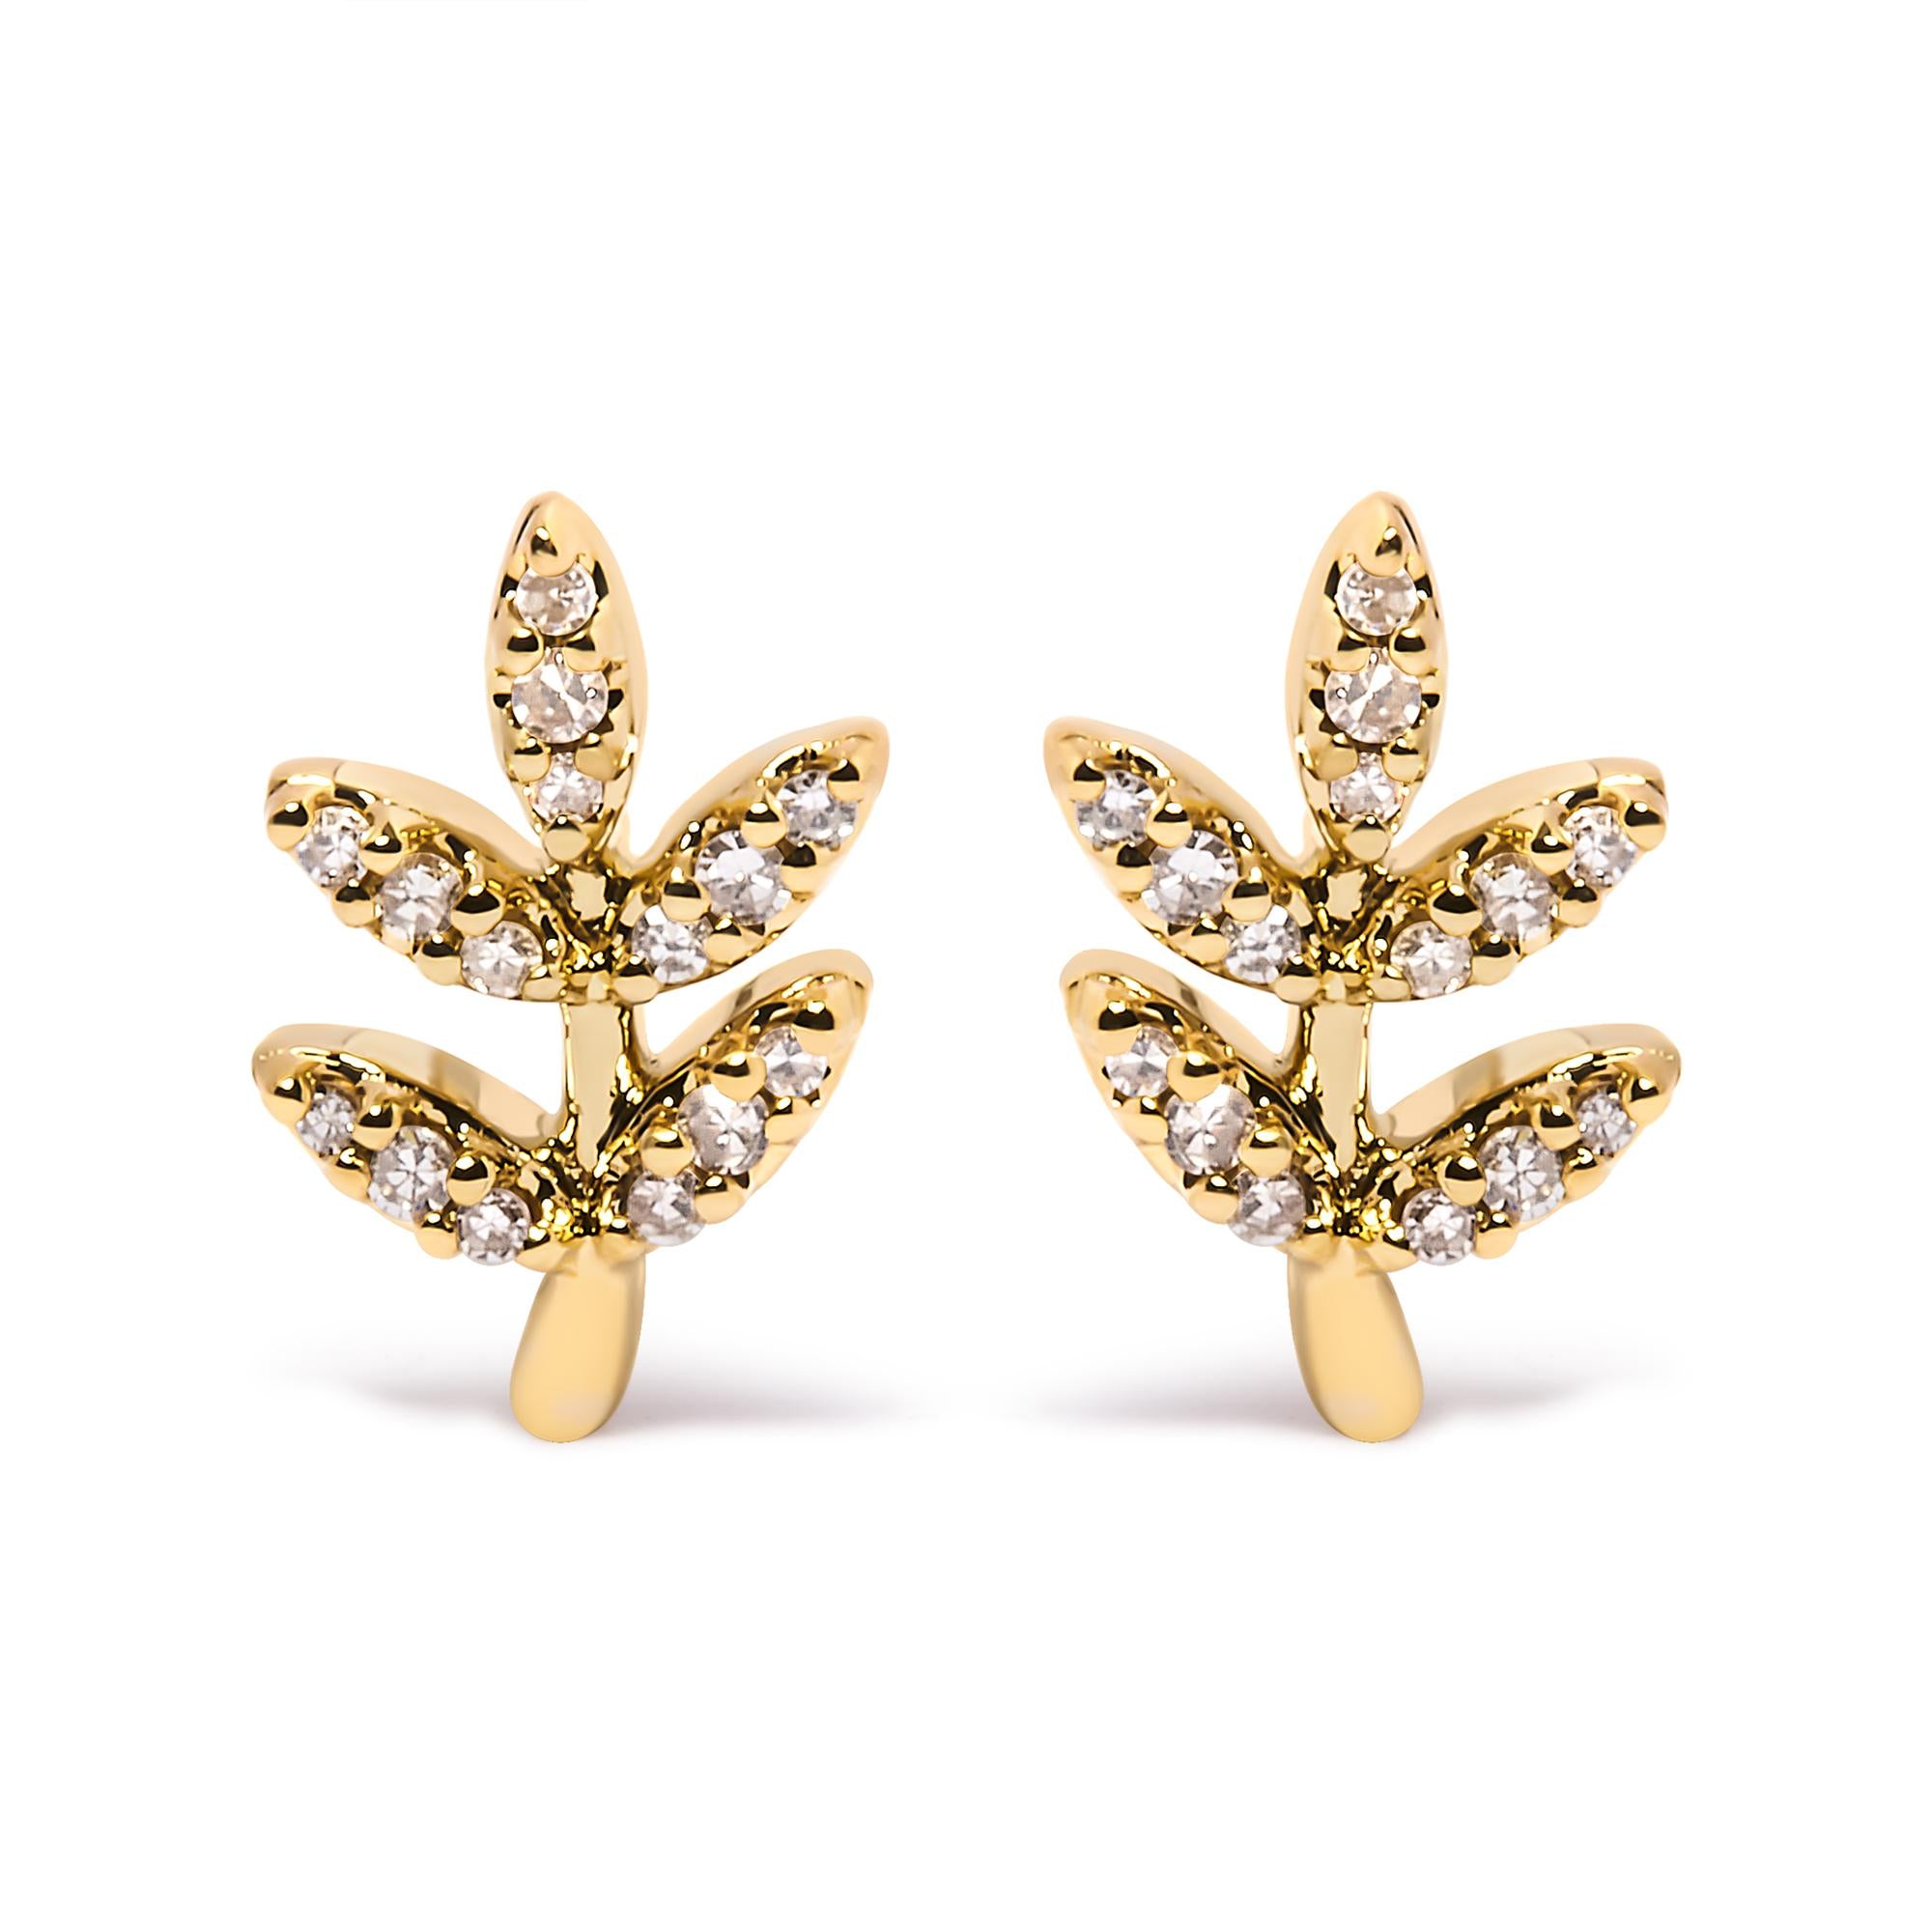 ''10K Yellow Gold 1/10 Cttw Diamond Accented Leaf and Branch STUD EARRINGS (H-I Color, I1-I2 Clarity)